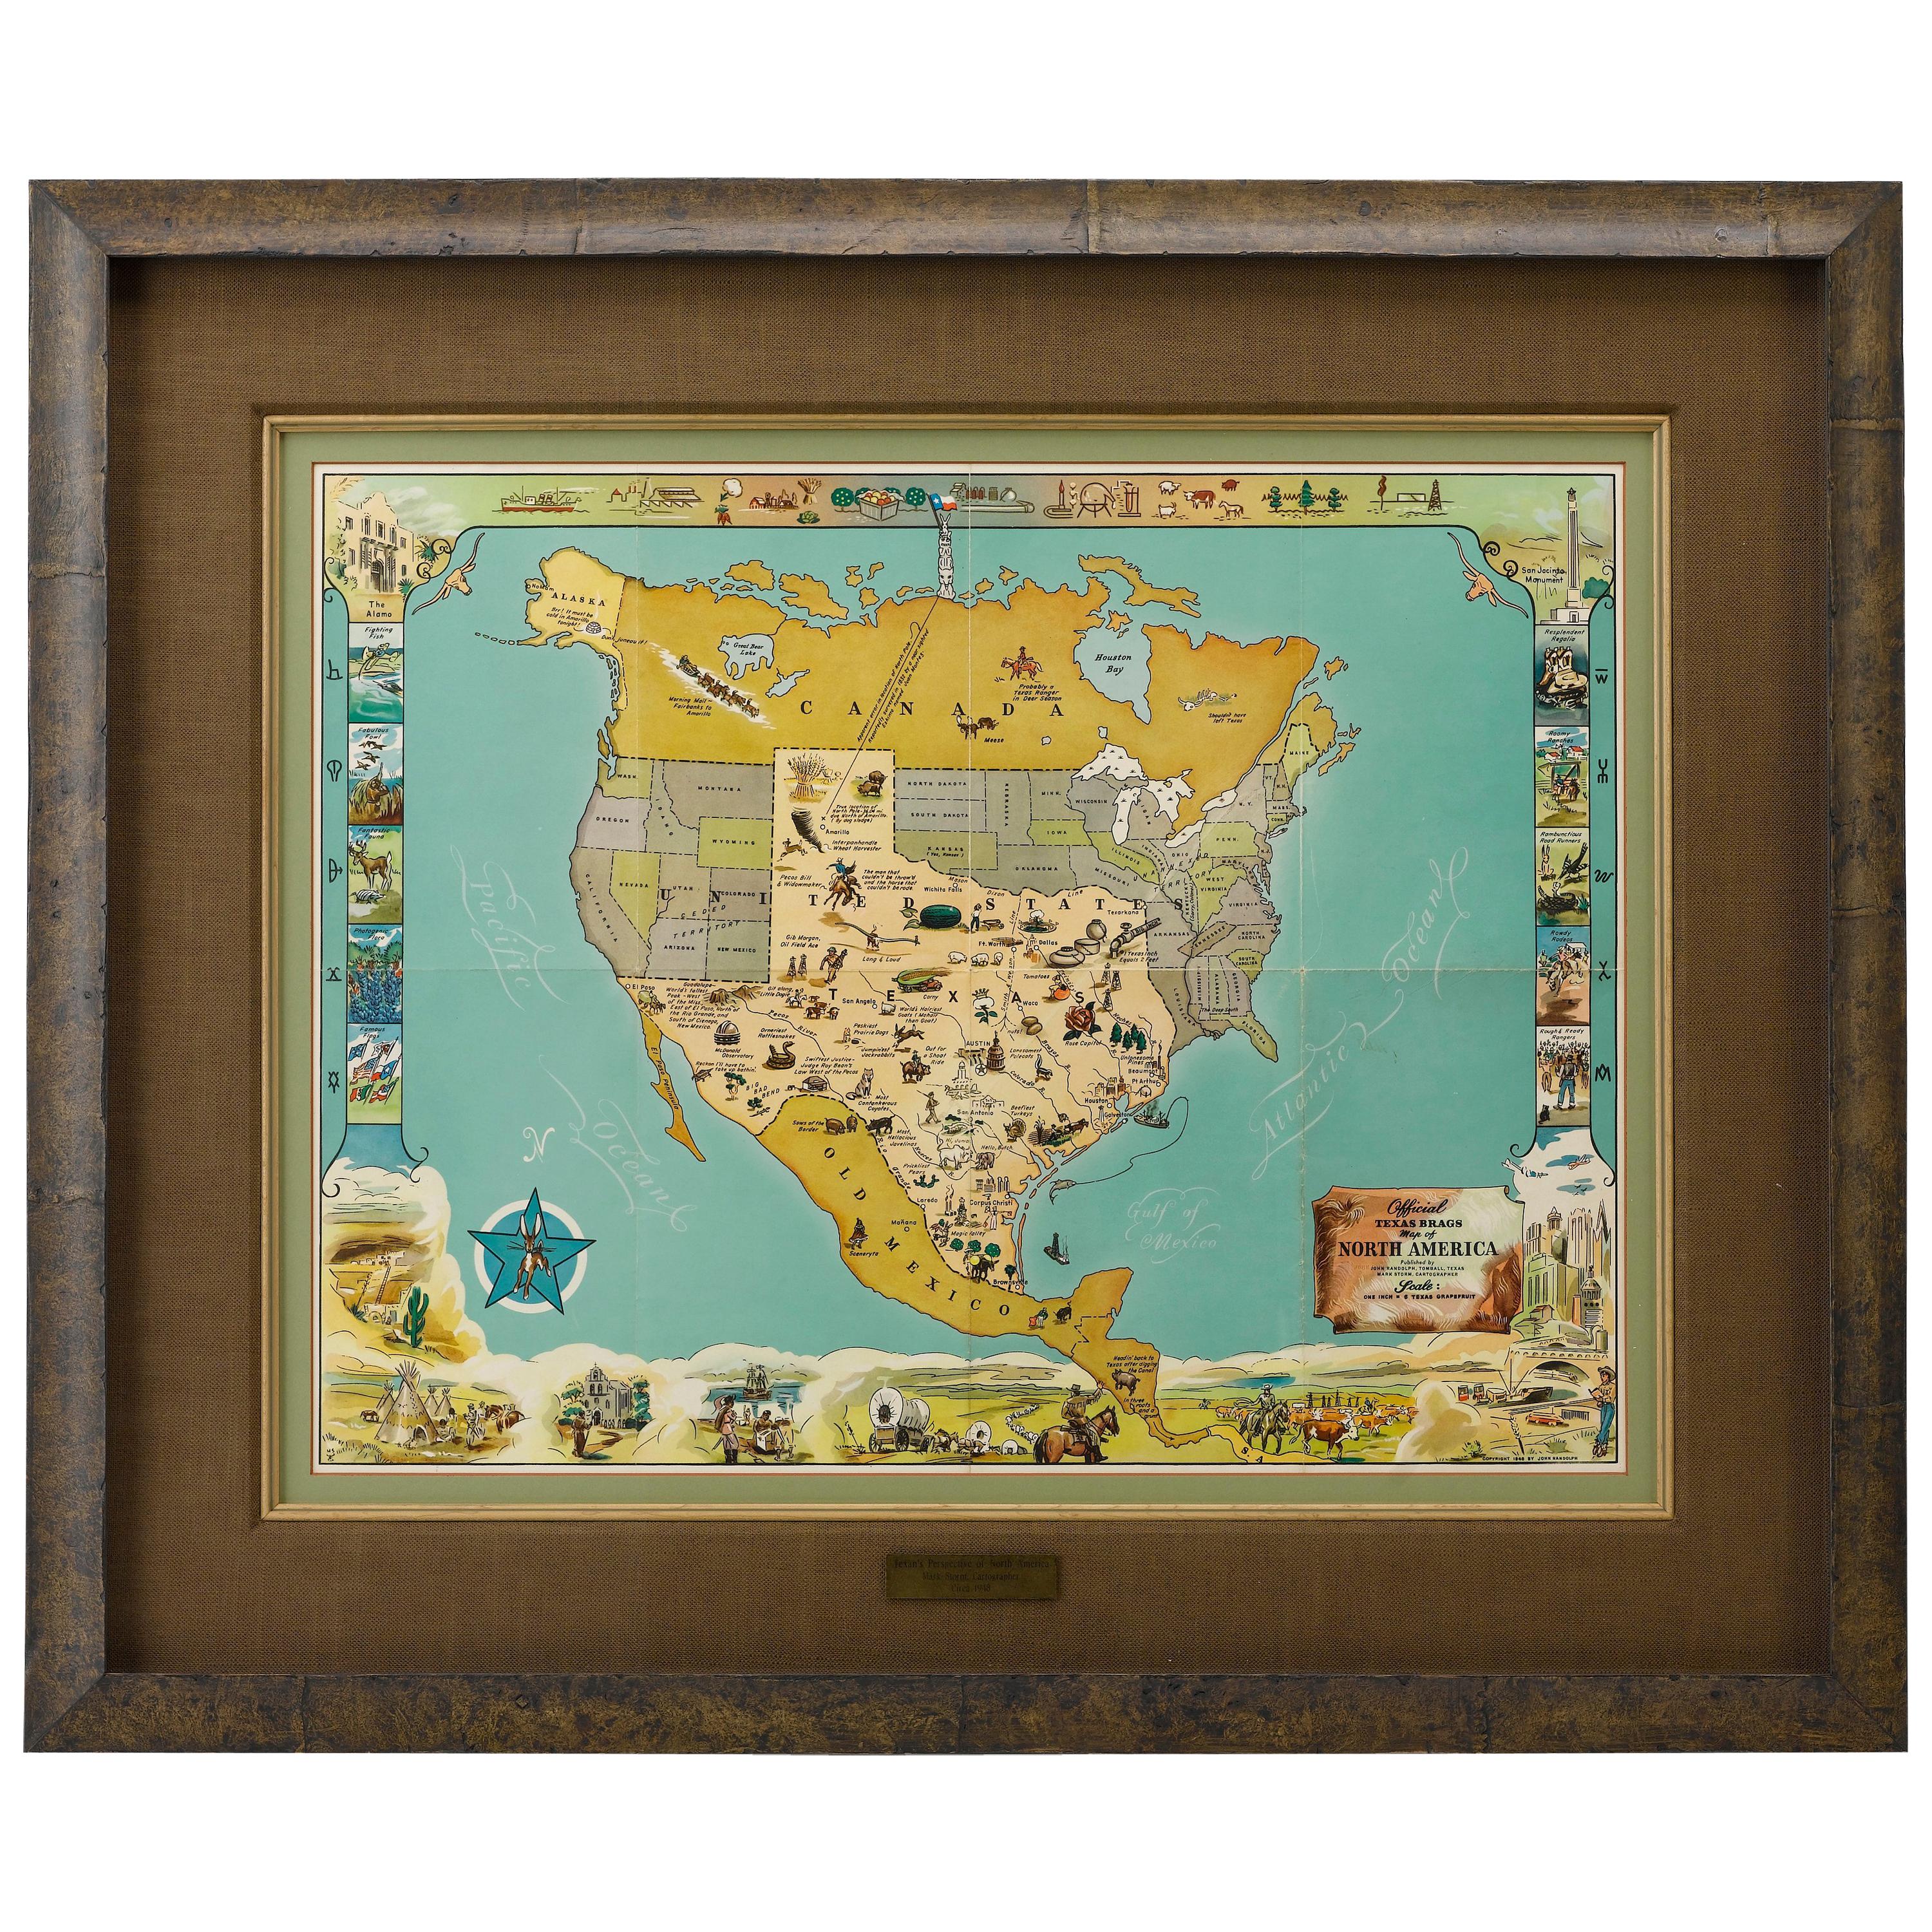 1948 Official "Texas Brags" Vintage Map of North America